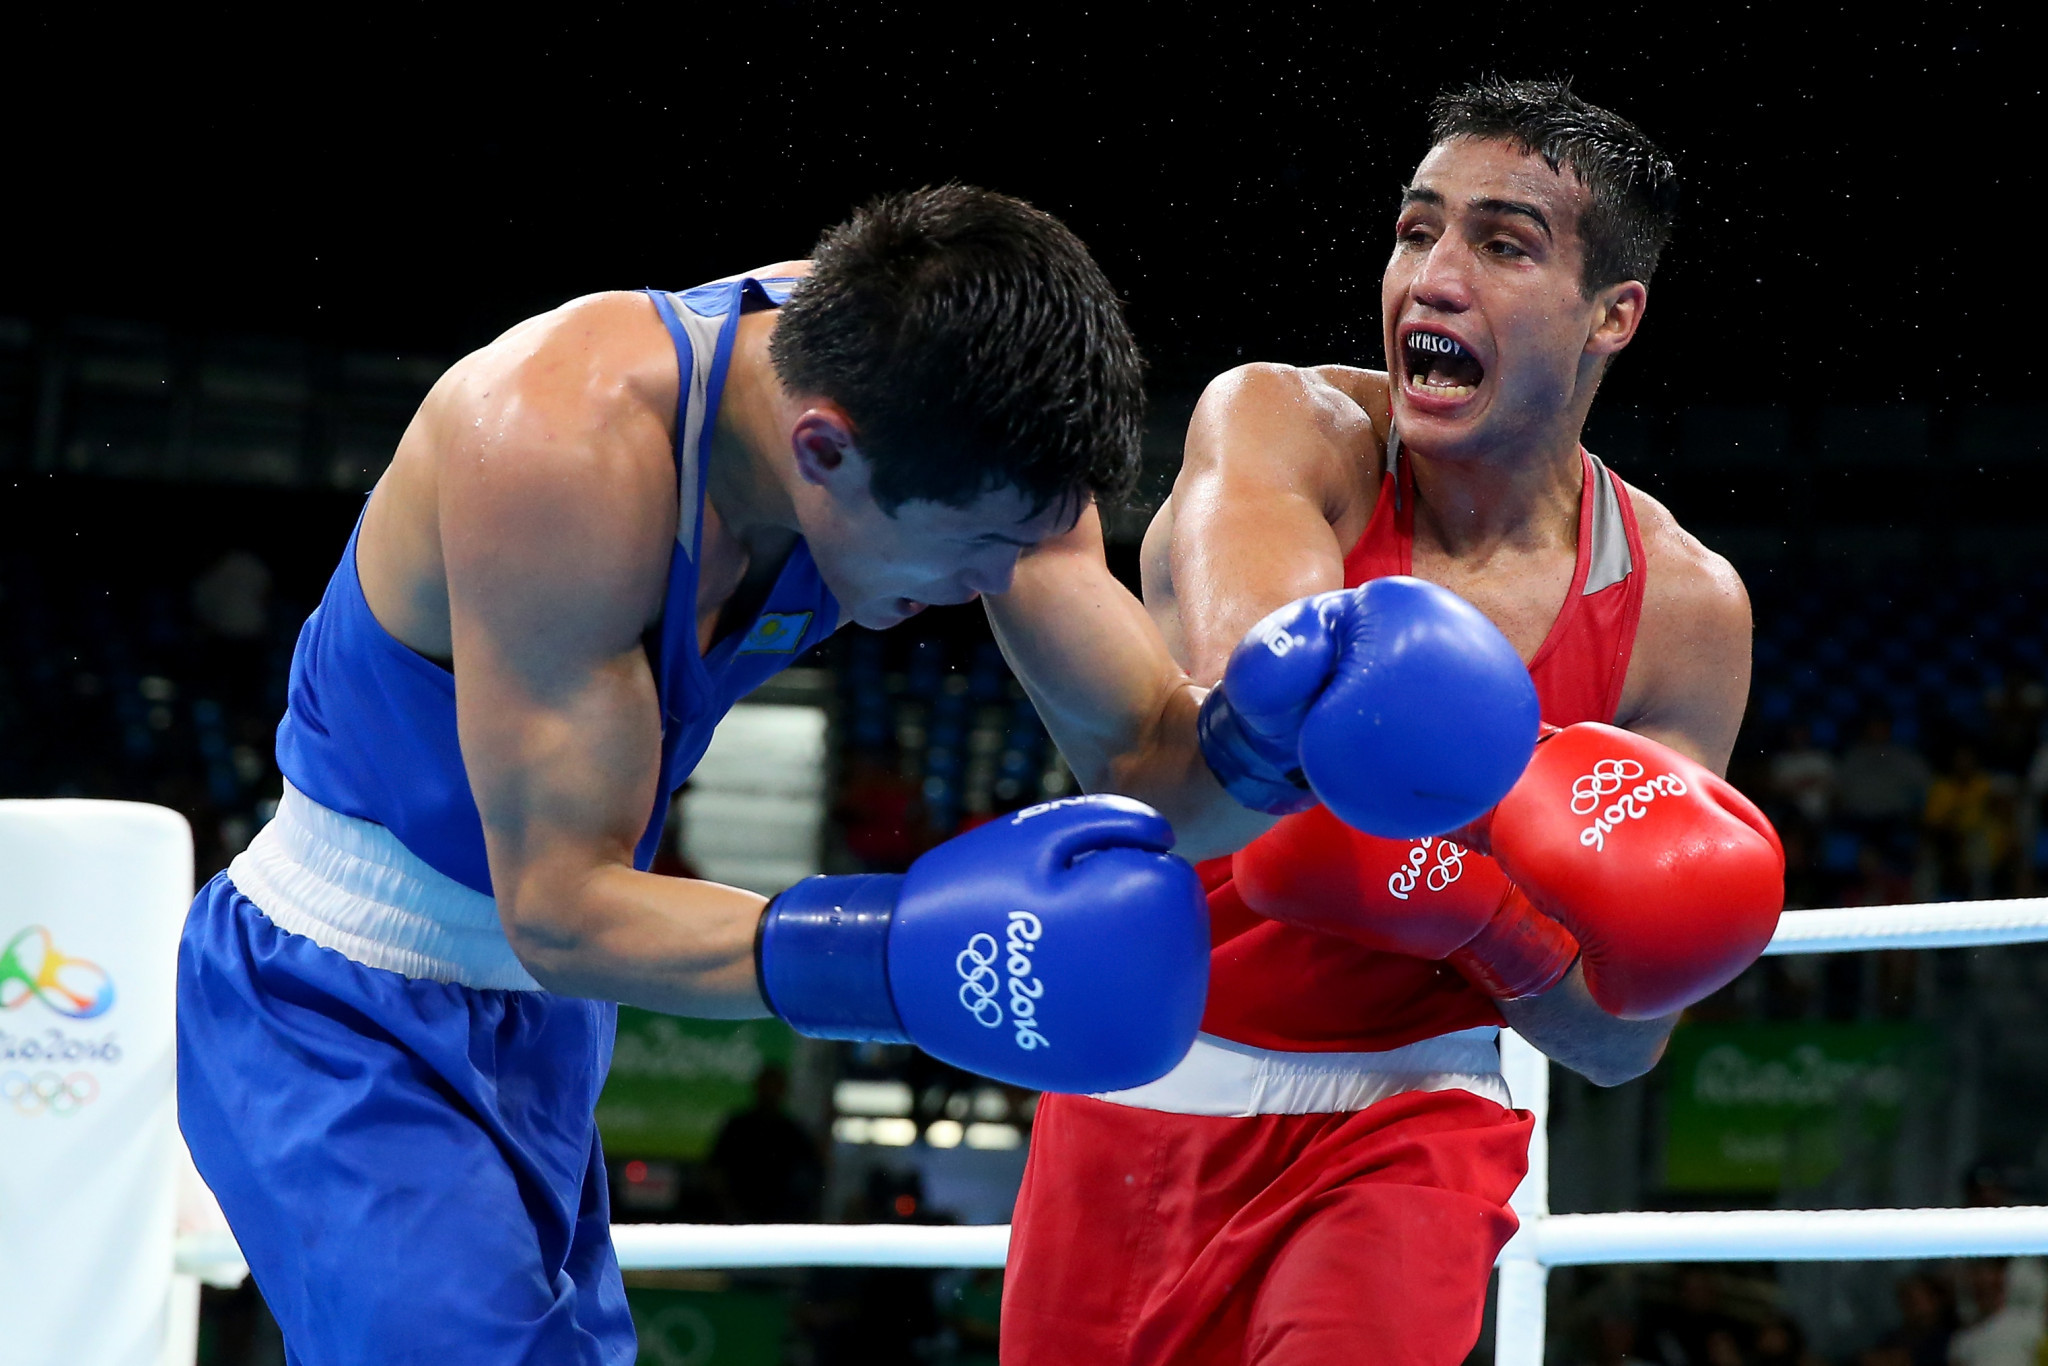 A boxing event not organised by AIBA could be held at Tokyo 2020 ©Getty Images